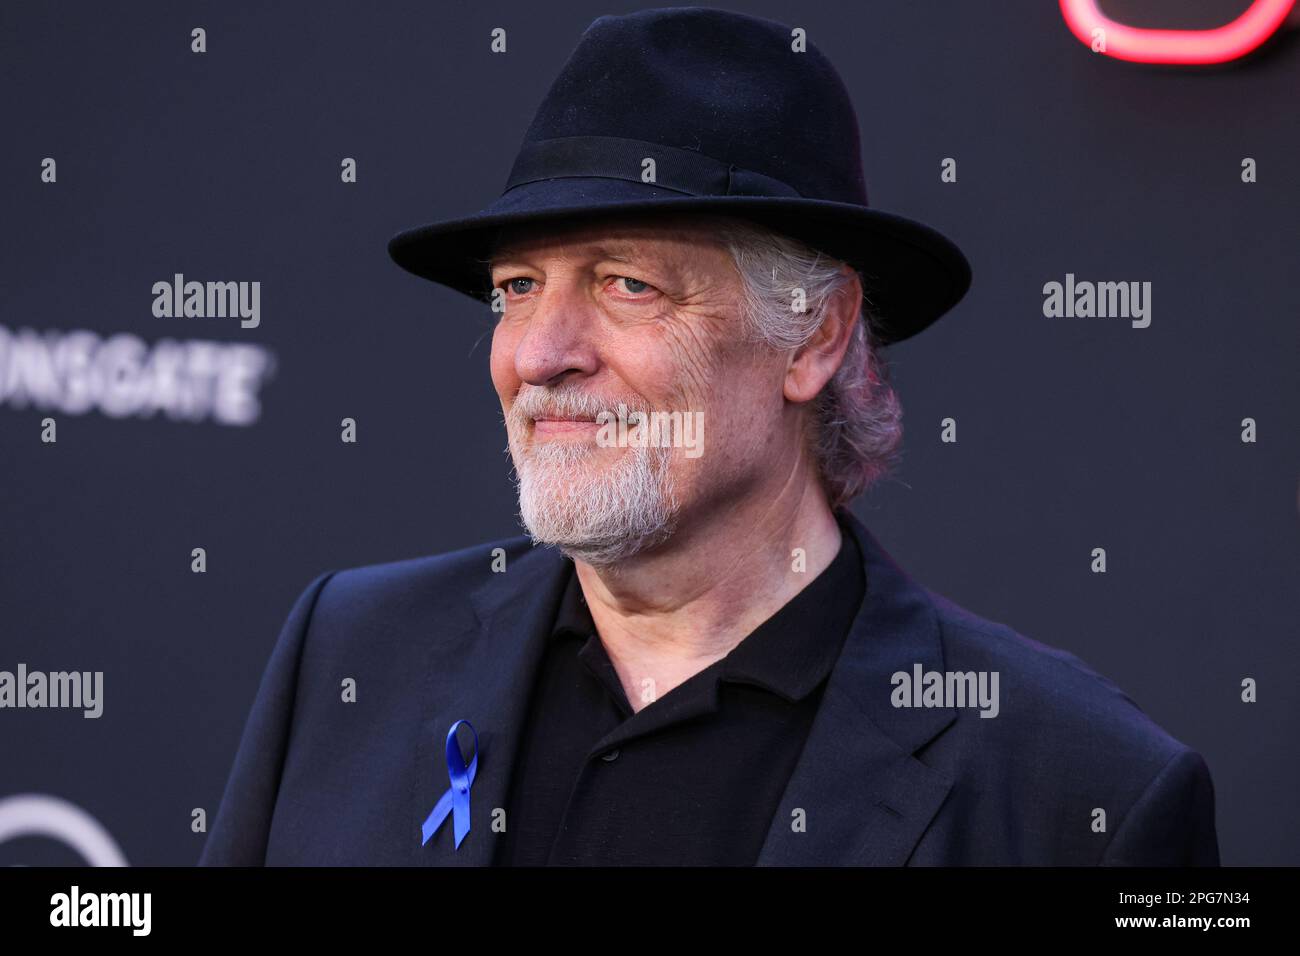 HOLLYWOOD, LOS ANGELES, CALIFORNIA, USA - MARCH 20: American actor Clancy Brown arrives at the Los Angeles Premiere Of Lionsgate's 'John Wick: Chapter 4' held at the TCL Chinese Theatre IMAX on March 20, 2023 in Hollywood, Los Angeles, California, United States. (Photo by Xavier Collin/Image Press Agency) Stock Photo